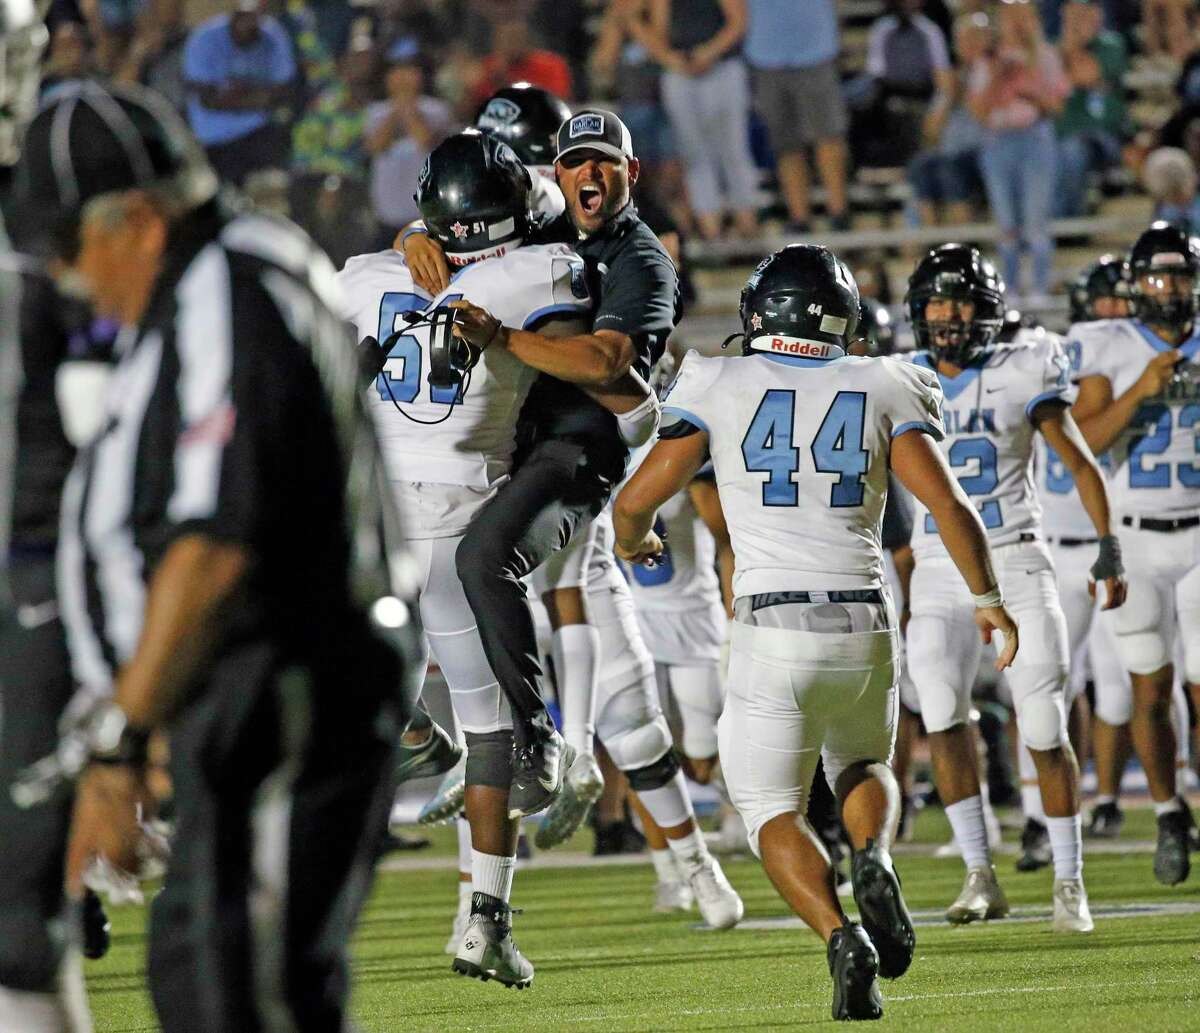 Harlan celebrates after Warren fumbled the ball in OT on Saturday, Sept. 24, 2020 at Gustafson Stadium Holmes defeated Warren 59-52 in OT.